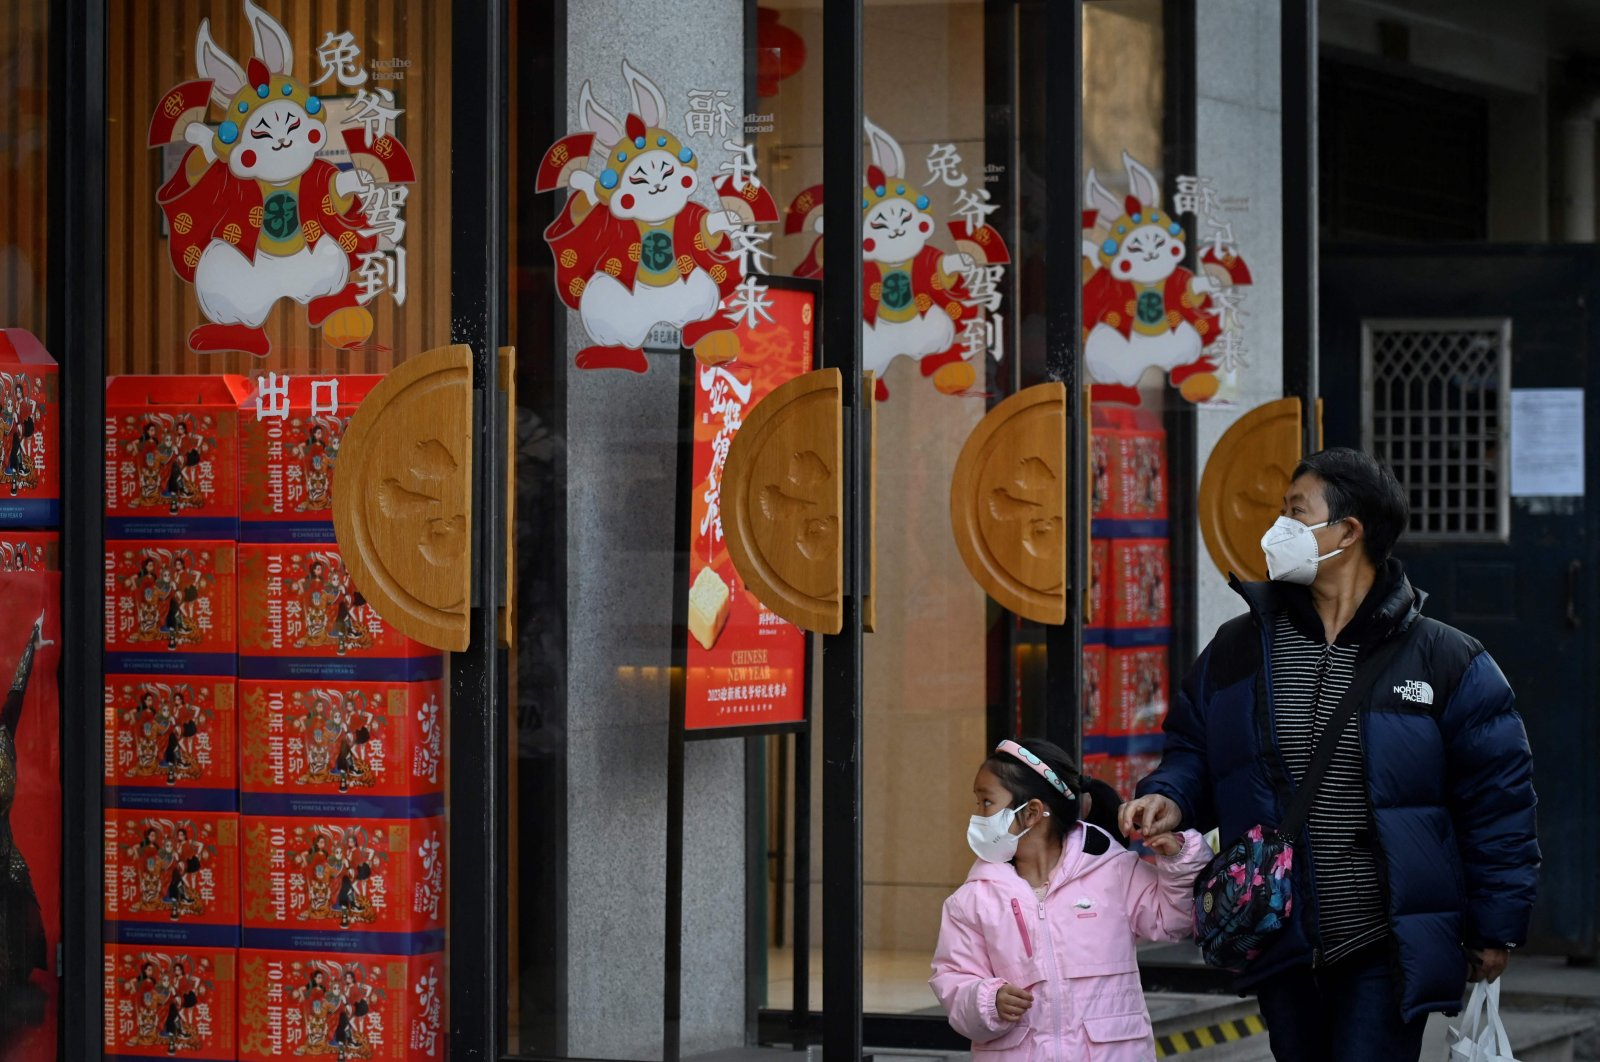 A man and a child walk past a bread shop decorated with rabbit patterns on doors, Beijing, Jan. 10, 2023. (AFP Photo)